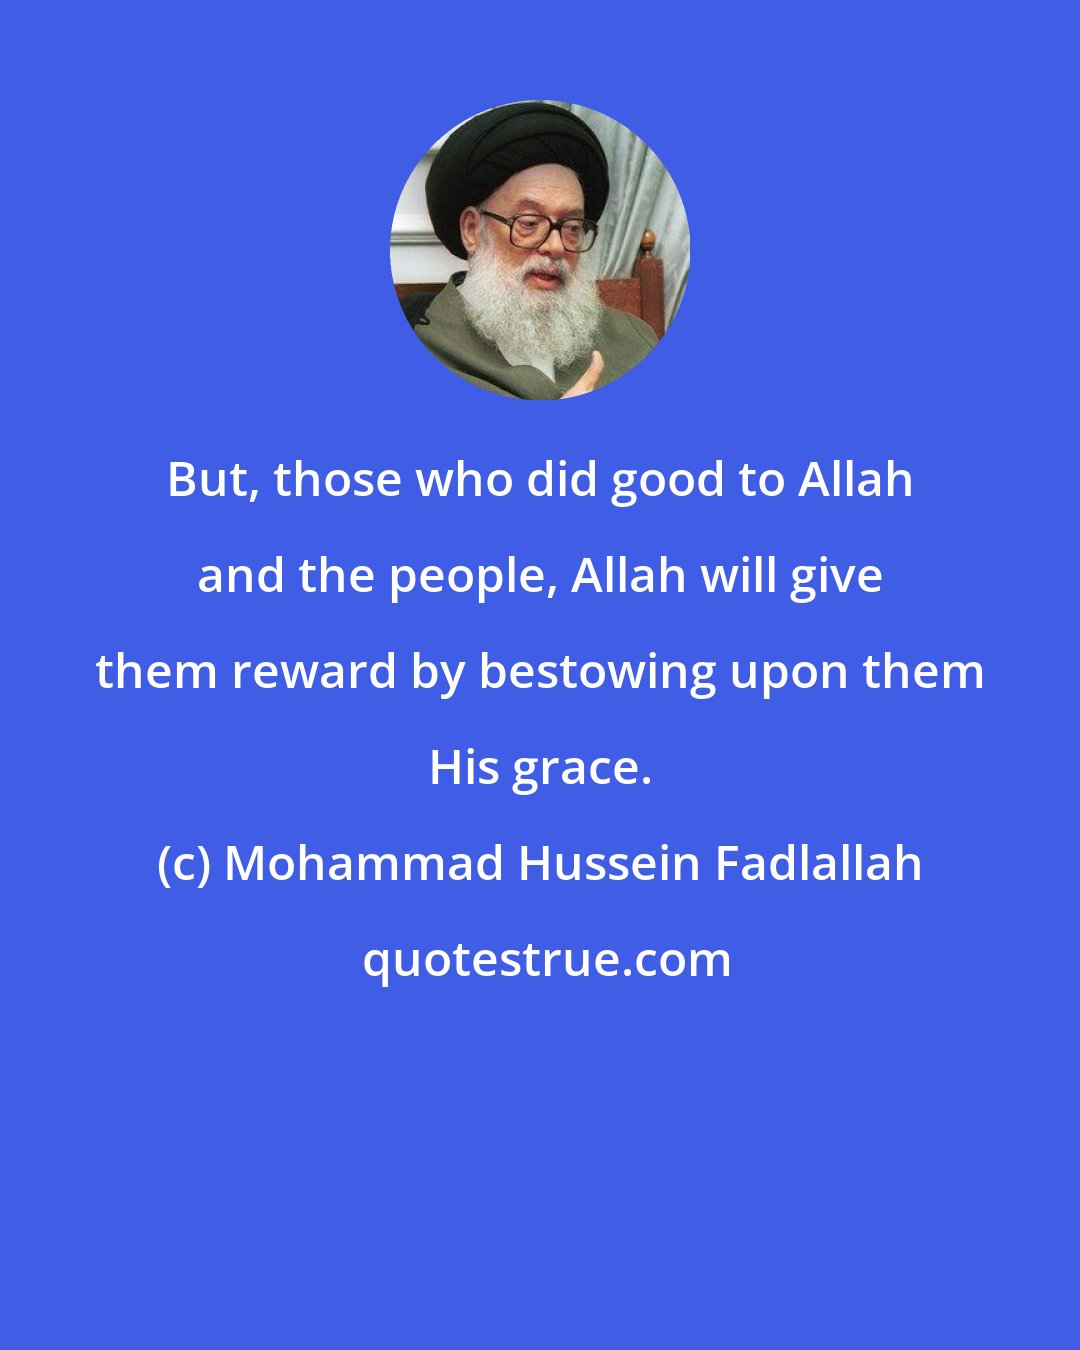 Mohammad Hussein Fadlallah: But, those who did good to Allah and the people, Allah will give them reward by bestowing upon them His grace.